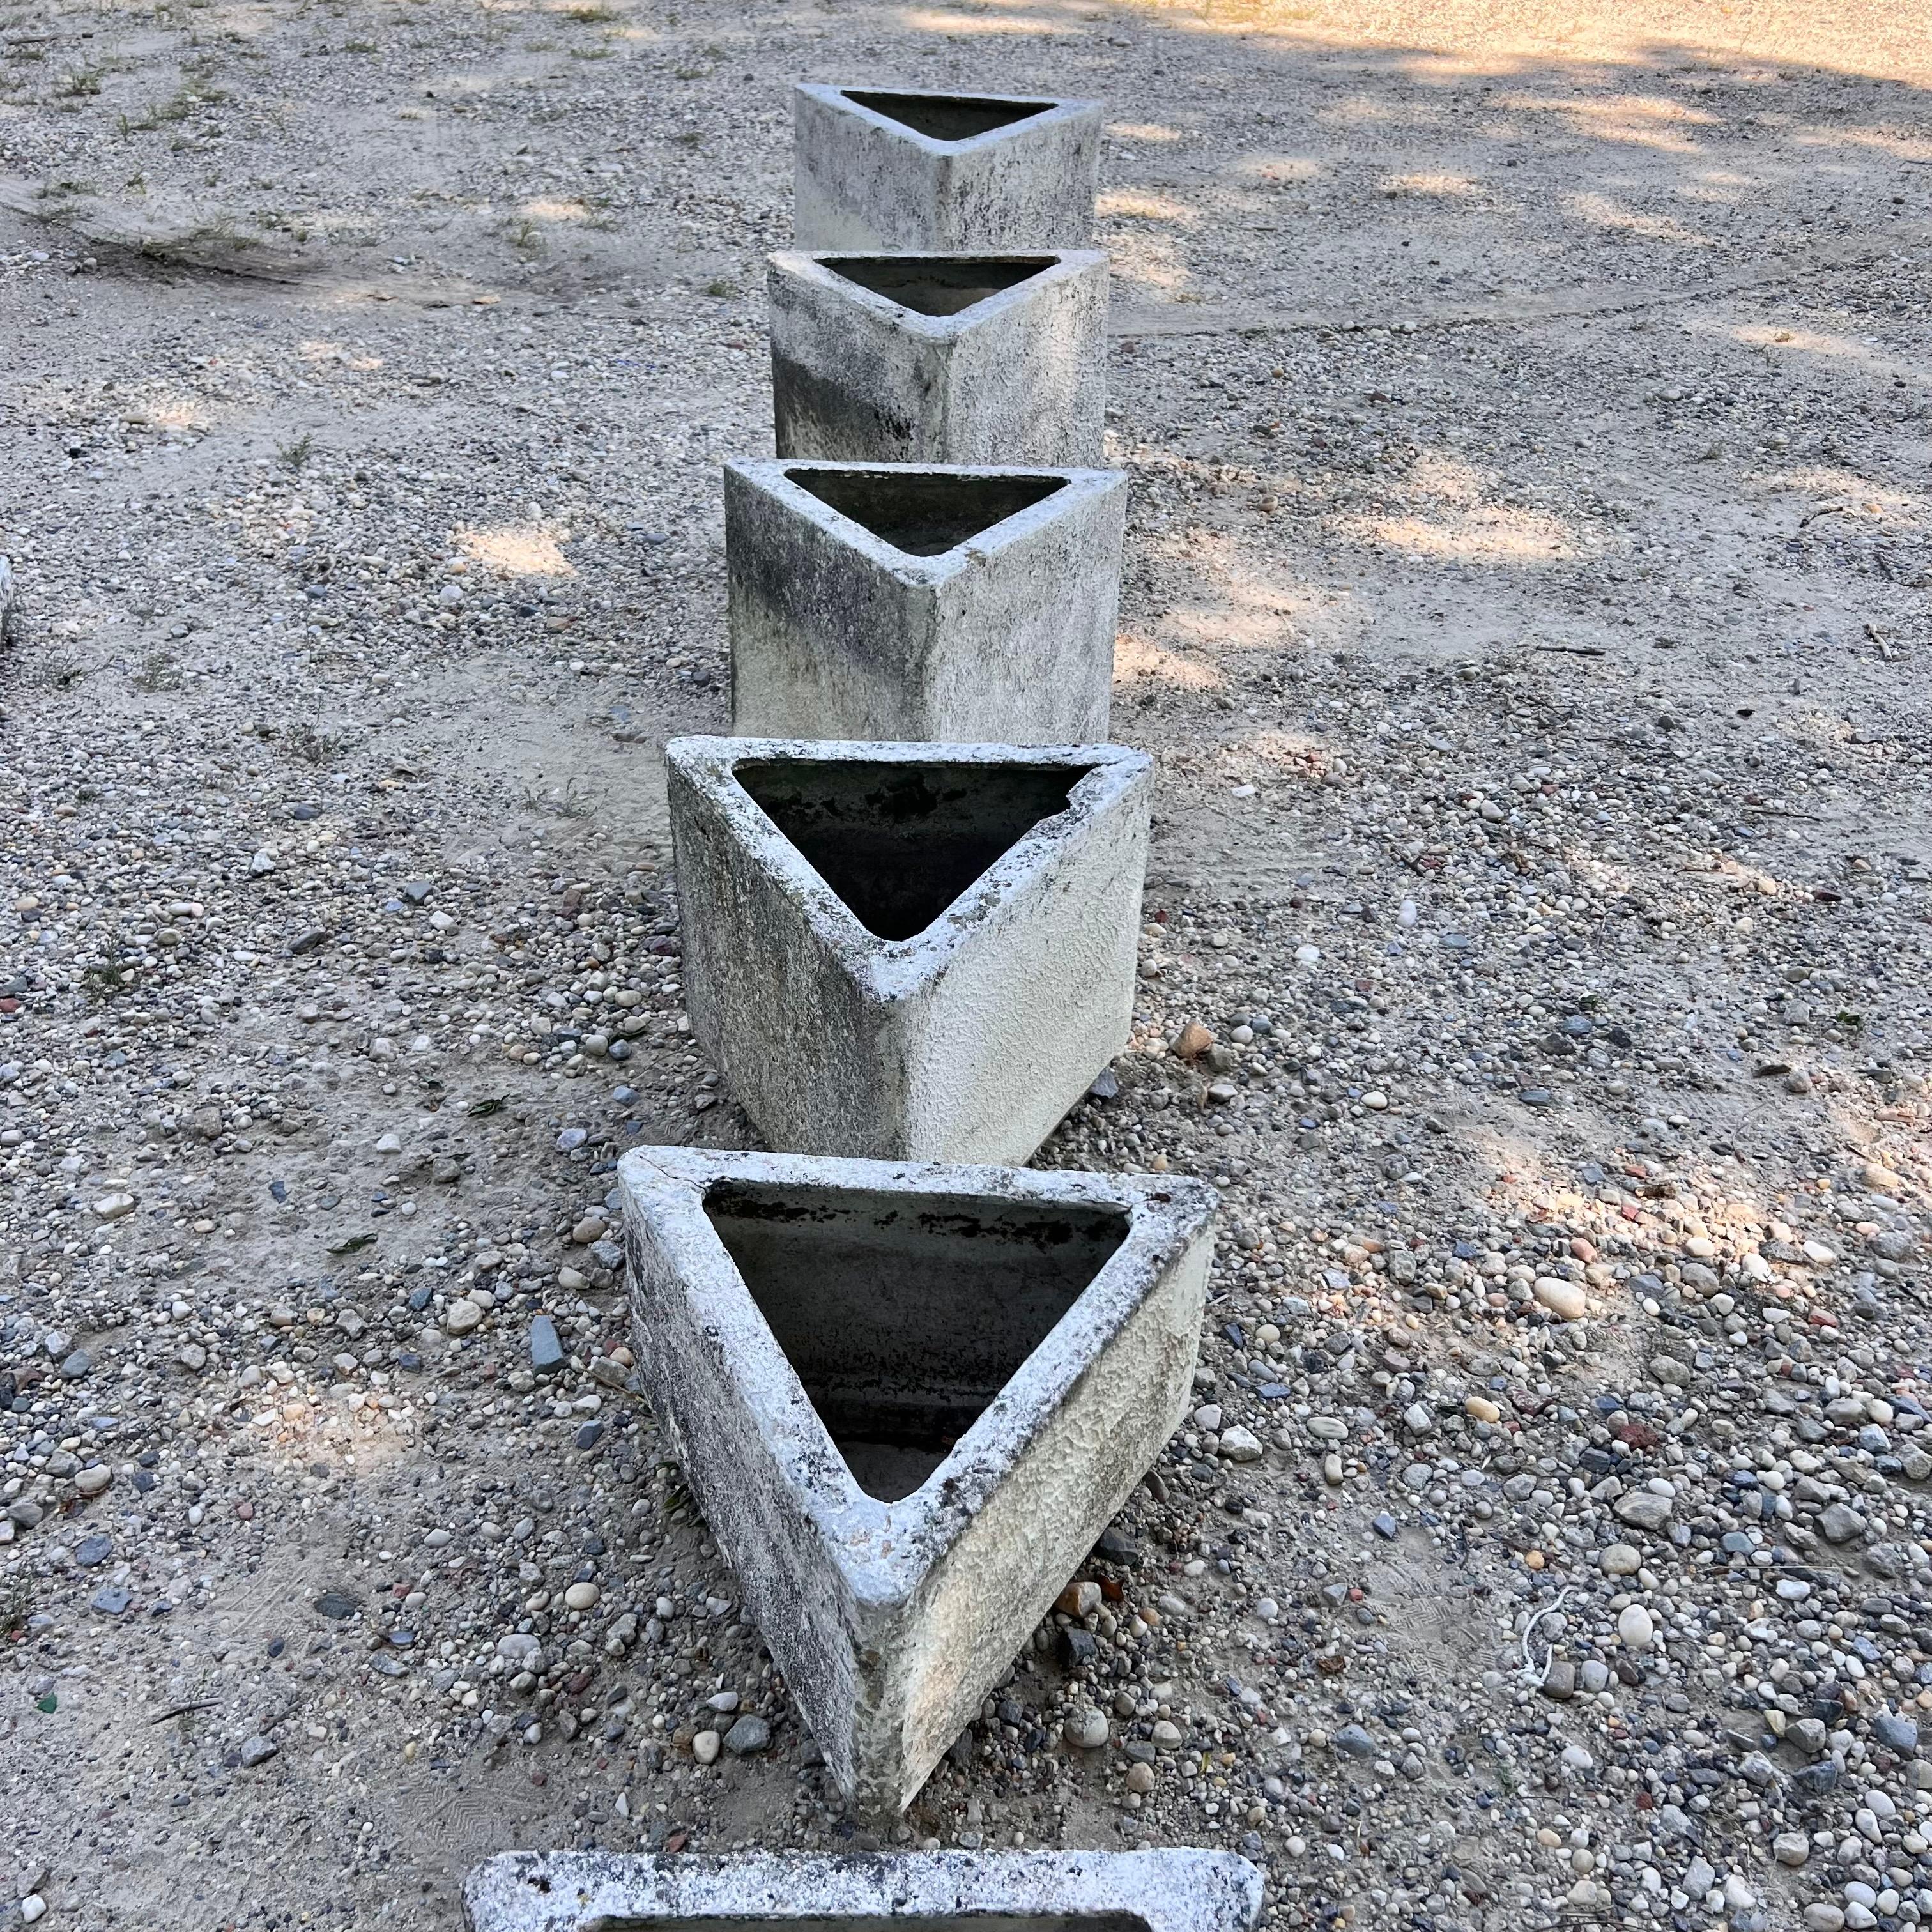 Concrete Complete Set of Triangular Planters by Willy Guhl, 1974 Switzerland For Sale